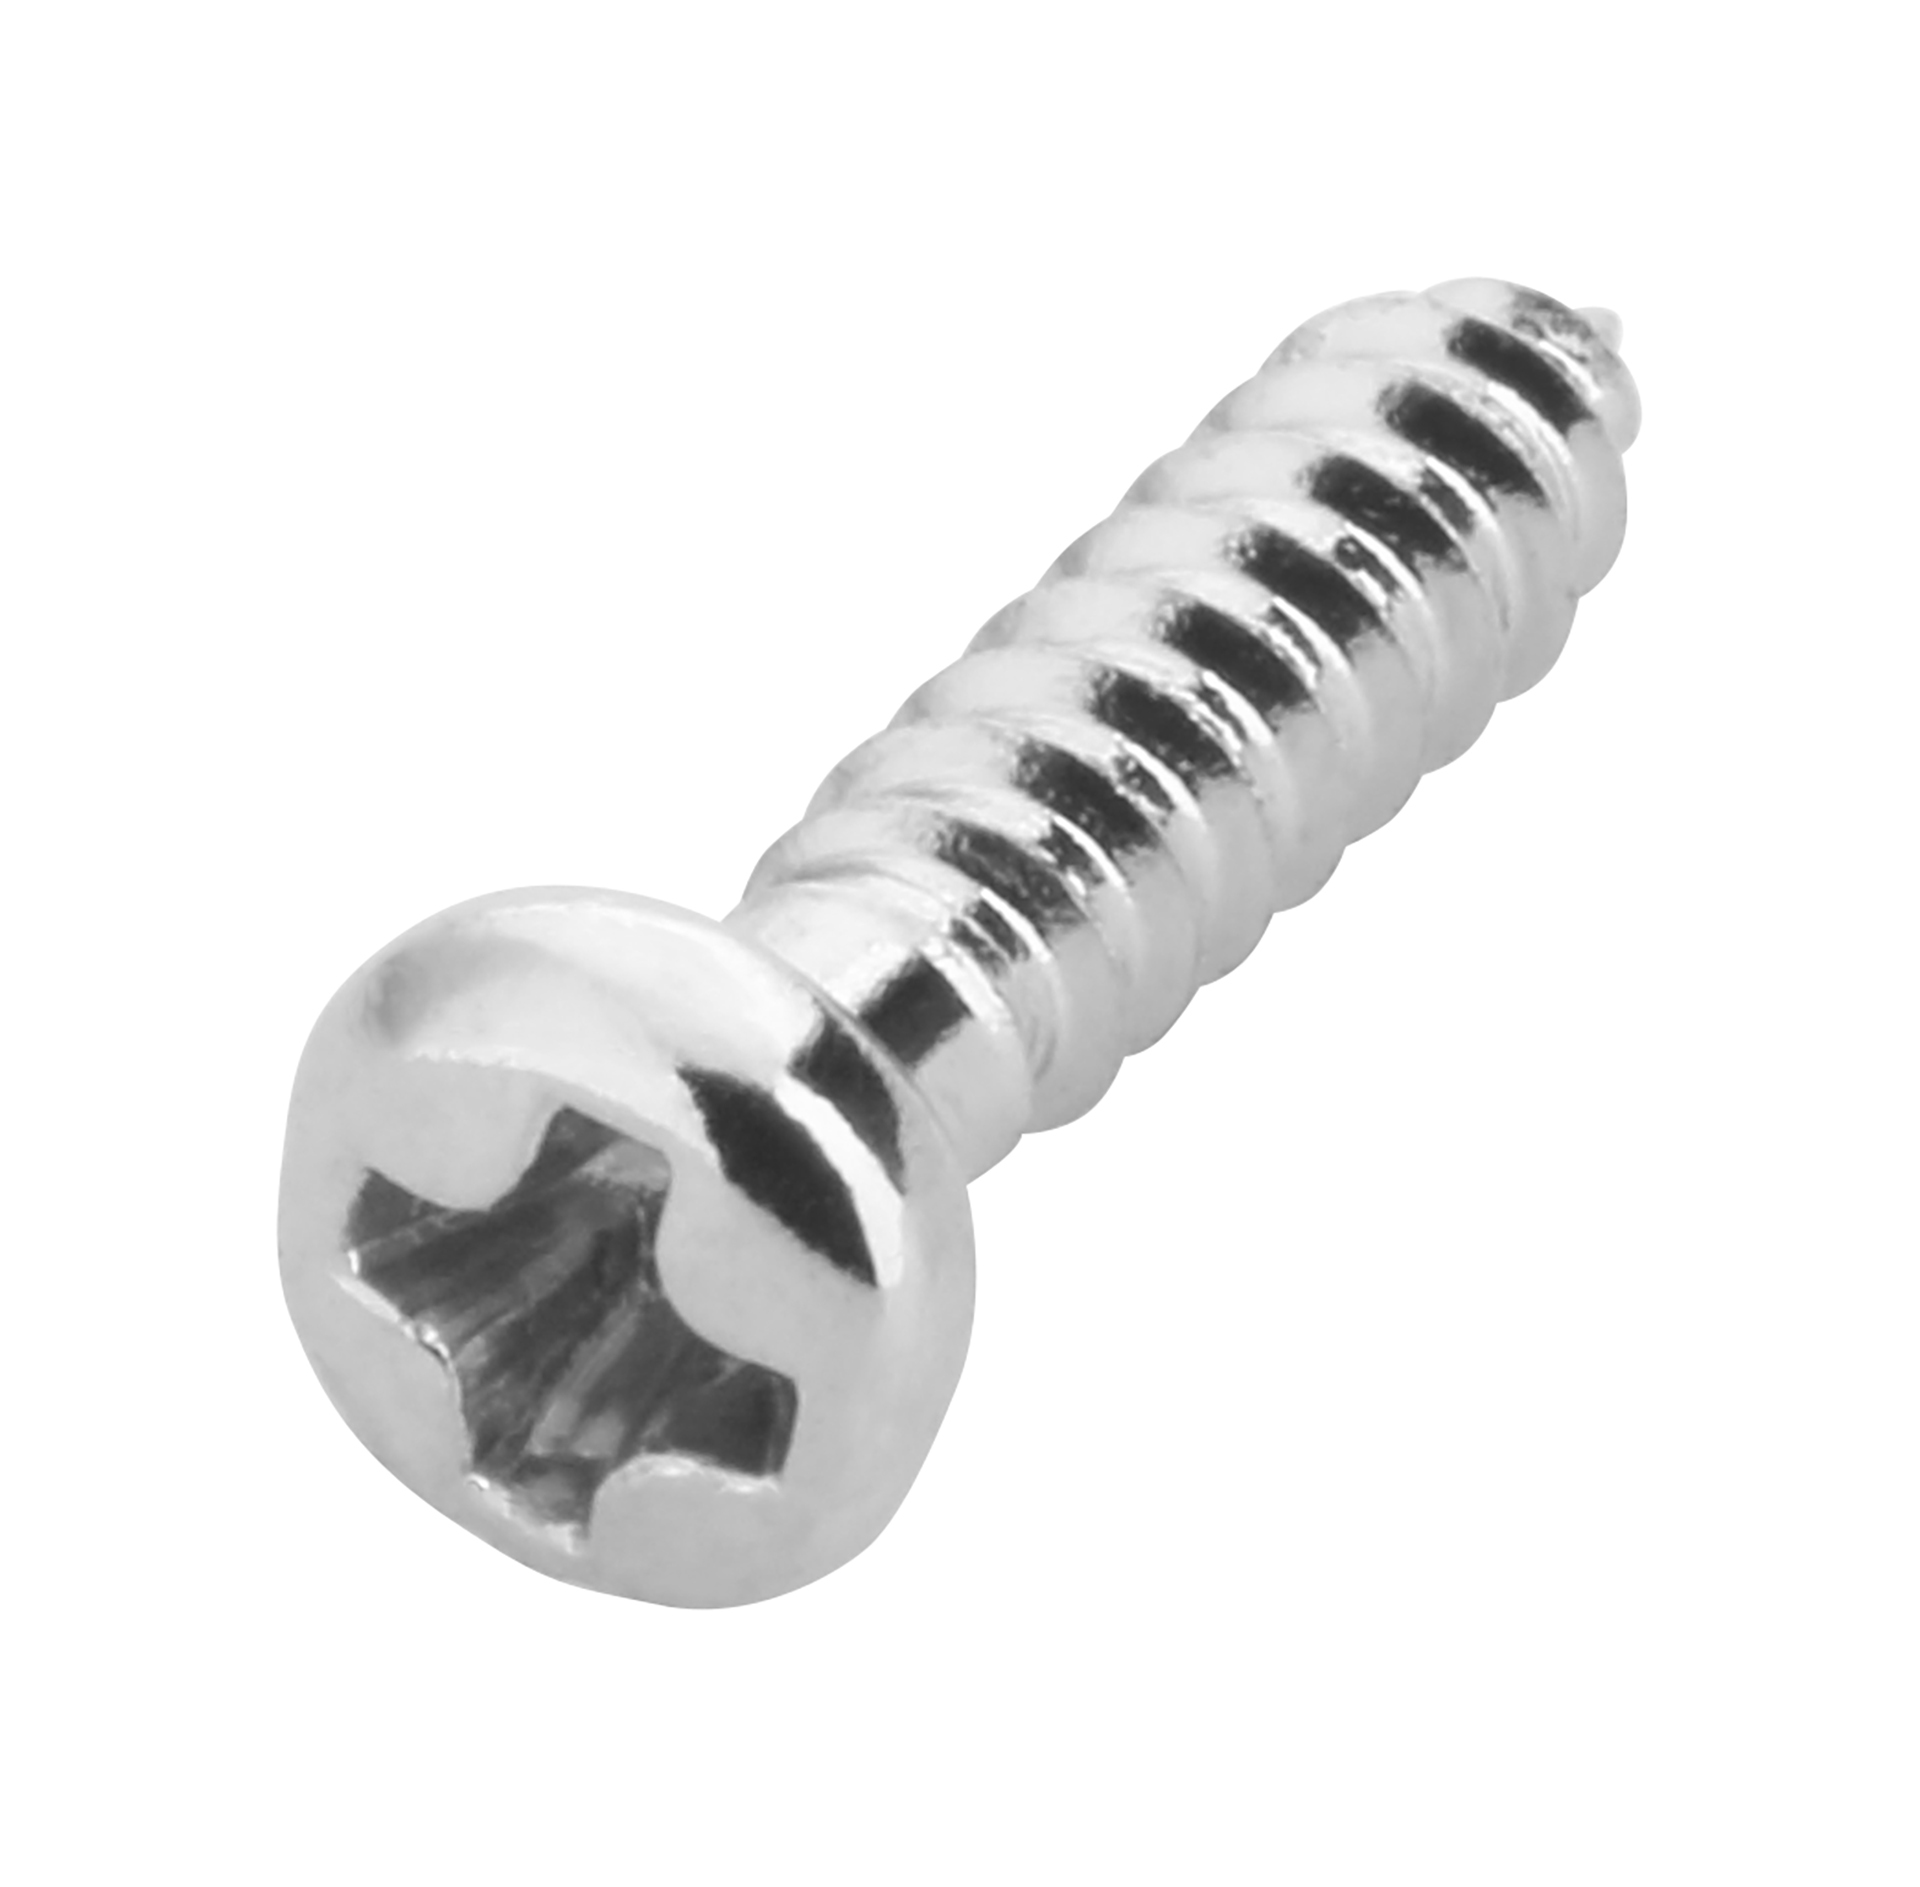 Grover Spare Parts - Wood Screw for Machine Heads - Nickel